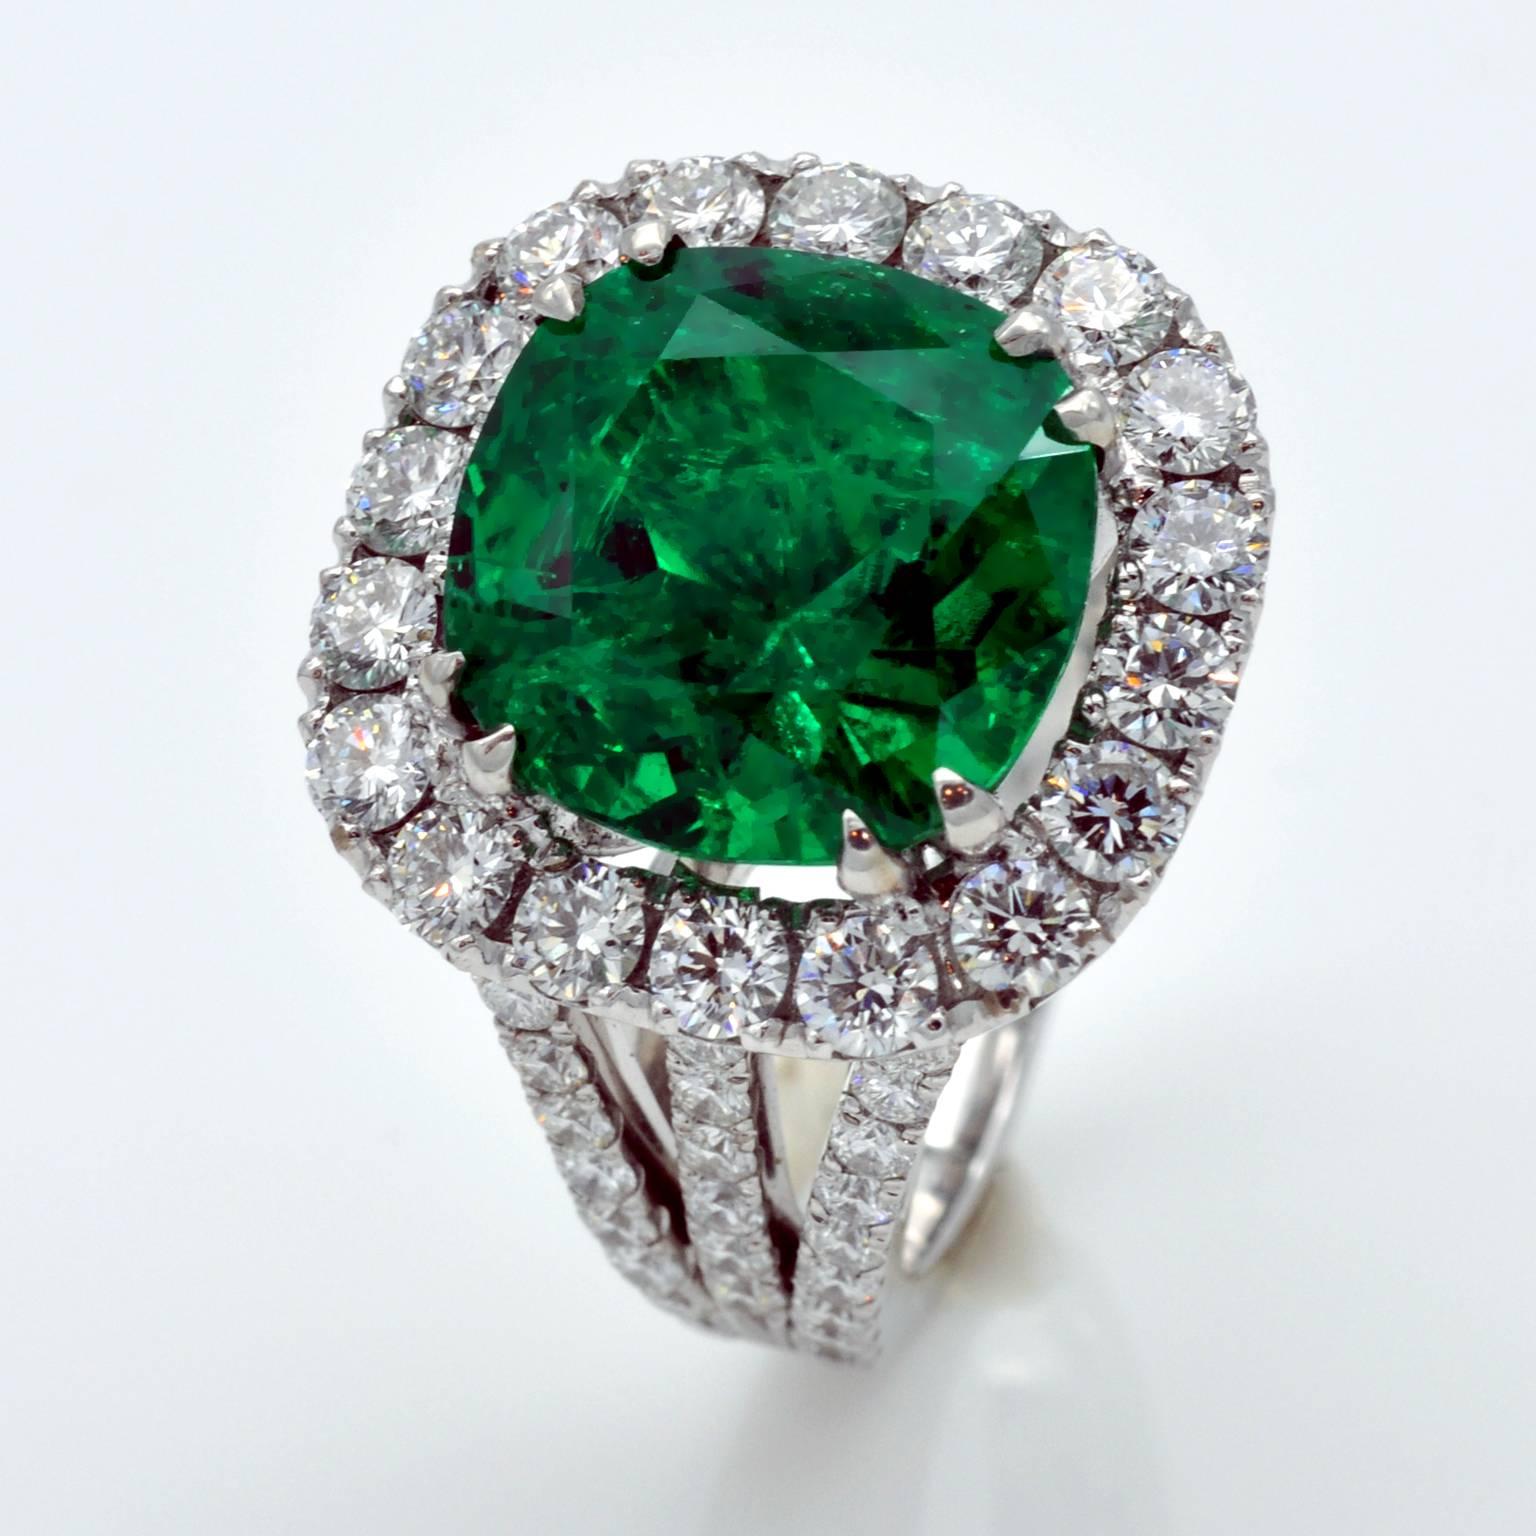 Impressive Rich green cushion shaped Colombian emerald weighing 9,37 carats set in a very attractive halo ring
Diamonds: 3,29 carats
Emeralds has their clarity usually and traditionally enhanced with cedar oil or even resin; moderate to minor